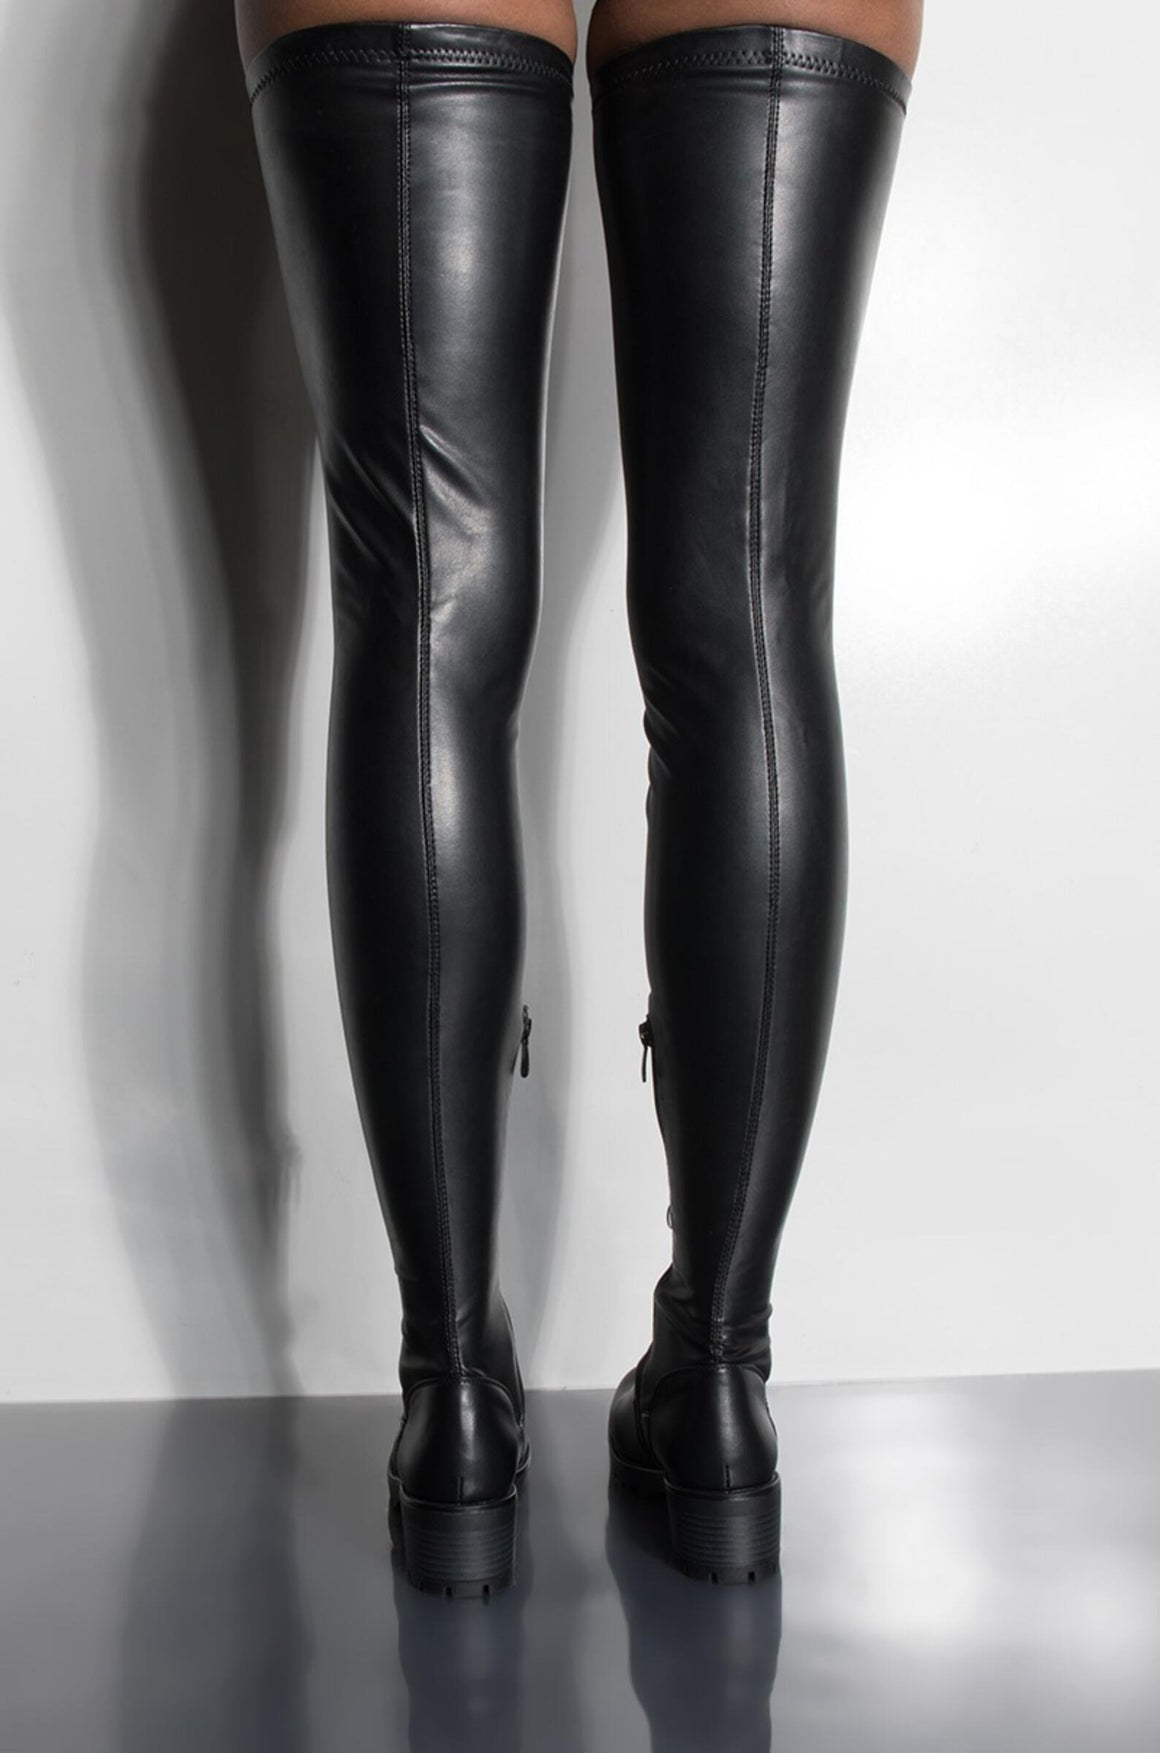 Surgical Thigh High Boot